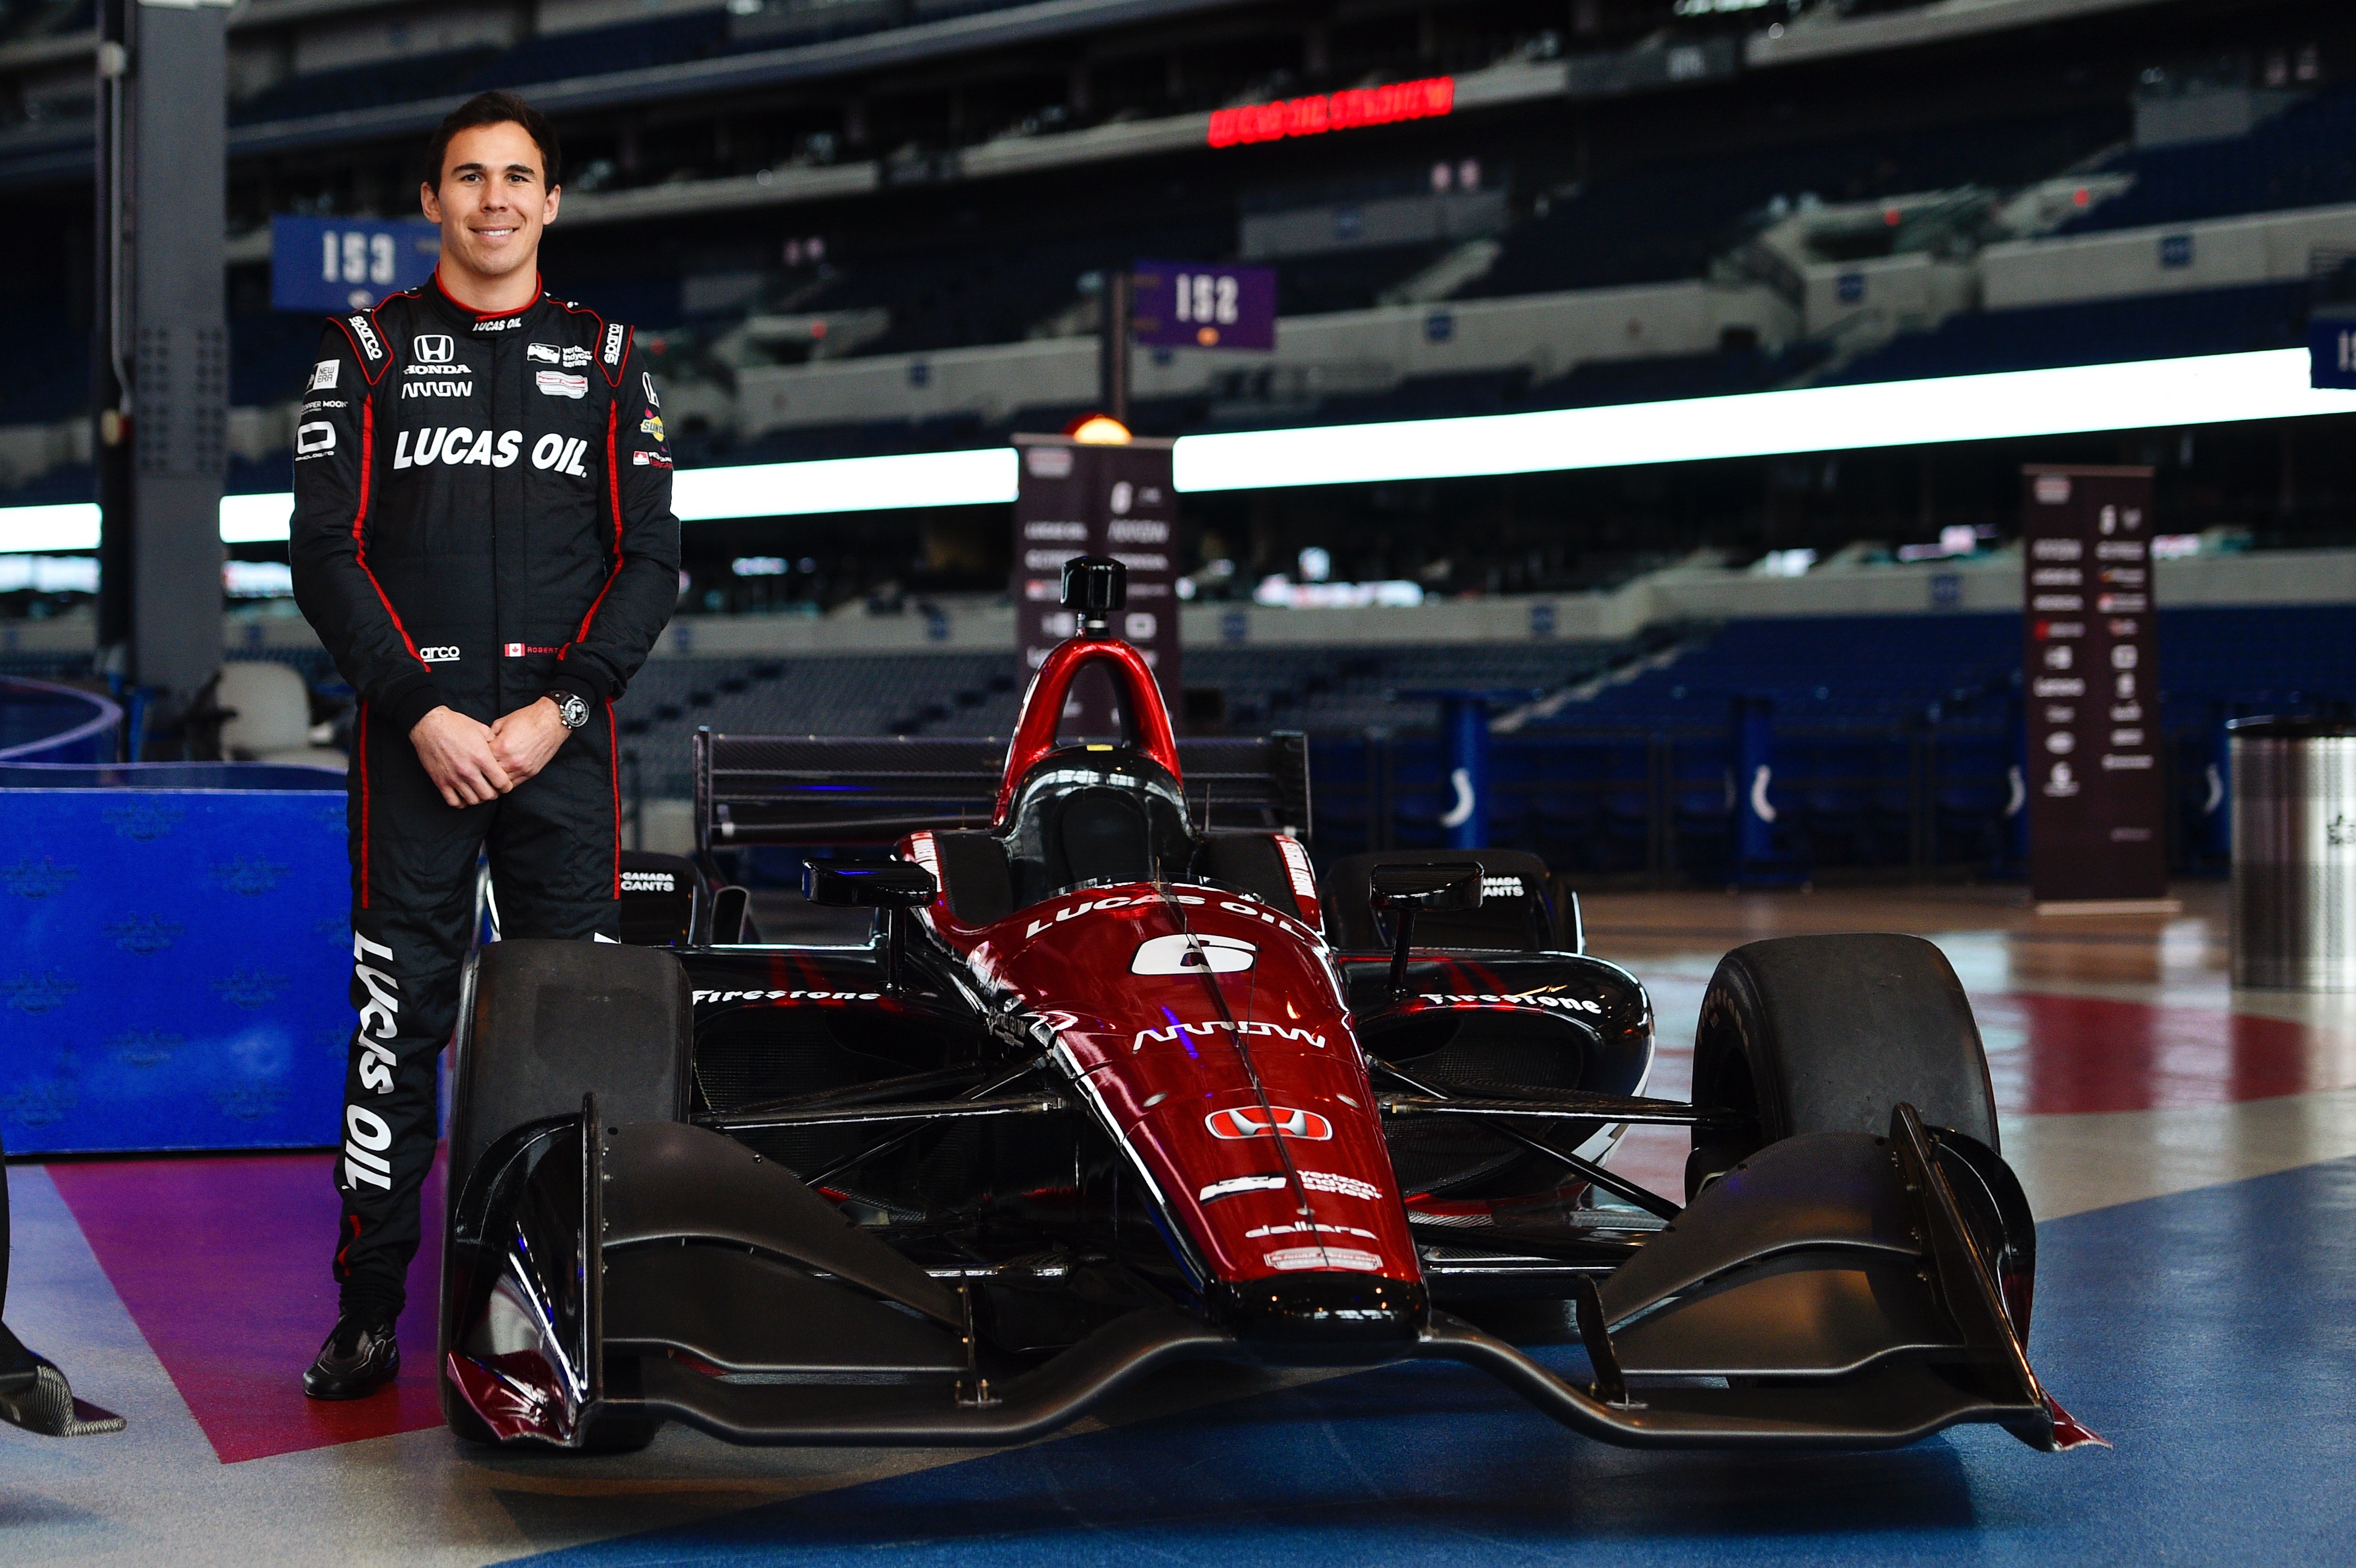 This is the unique hand-control setup Robert Wickens uses to win, Articles